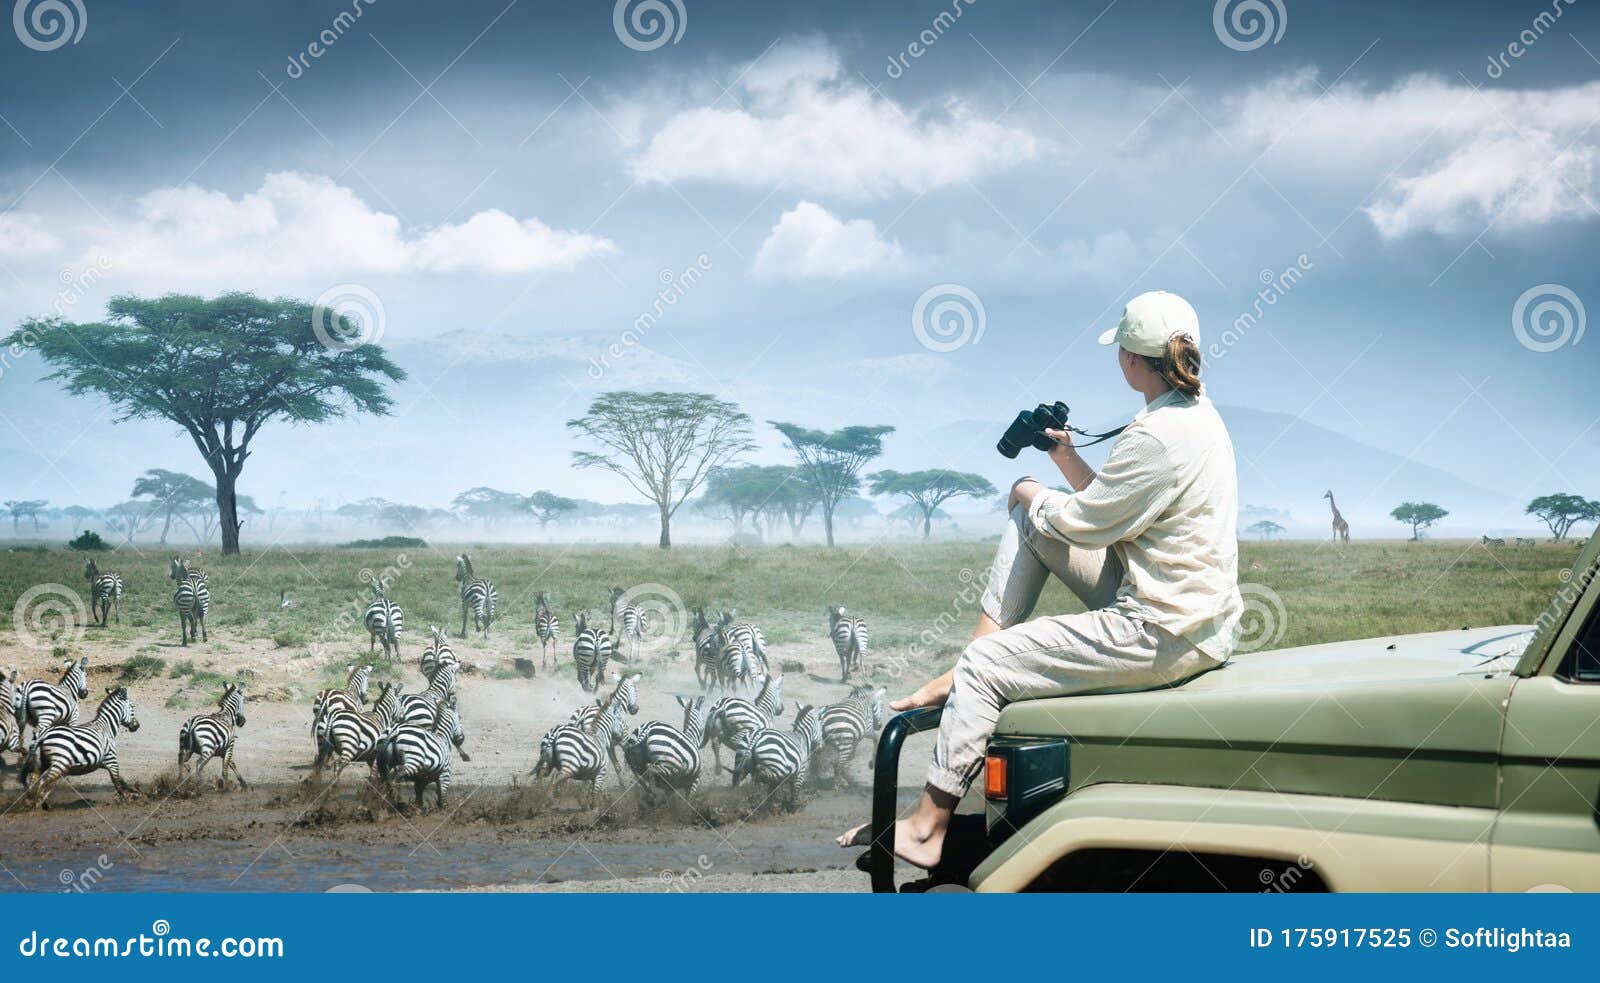 woman tourist on safari in africa, traveling by car in kenya and tanzania, watching zebras and antelopes in the savannah